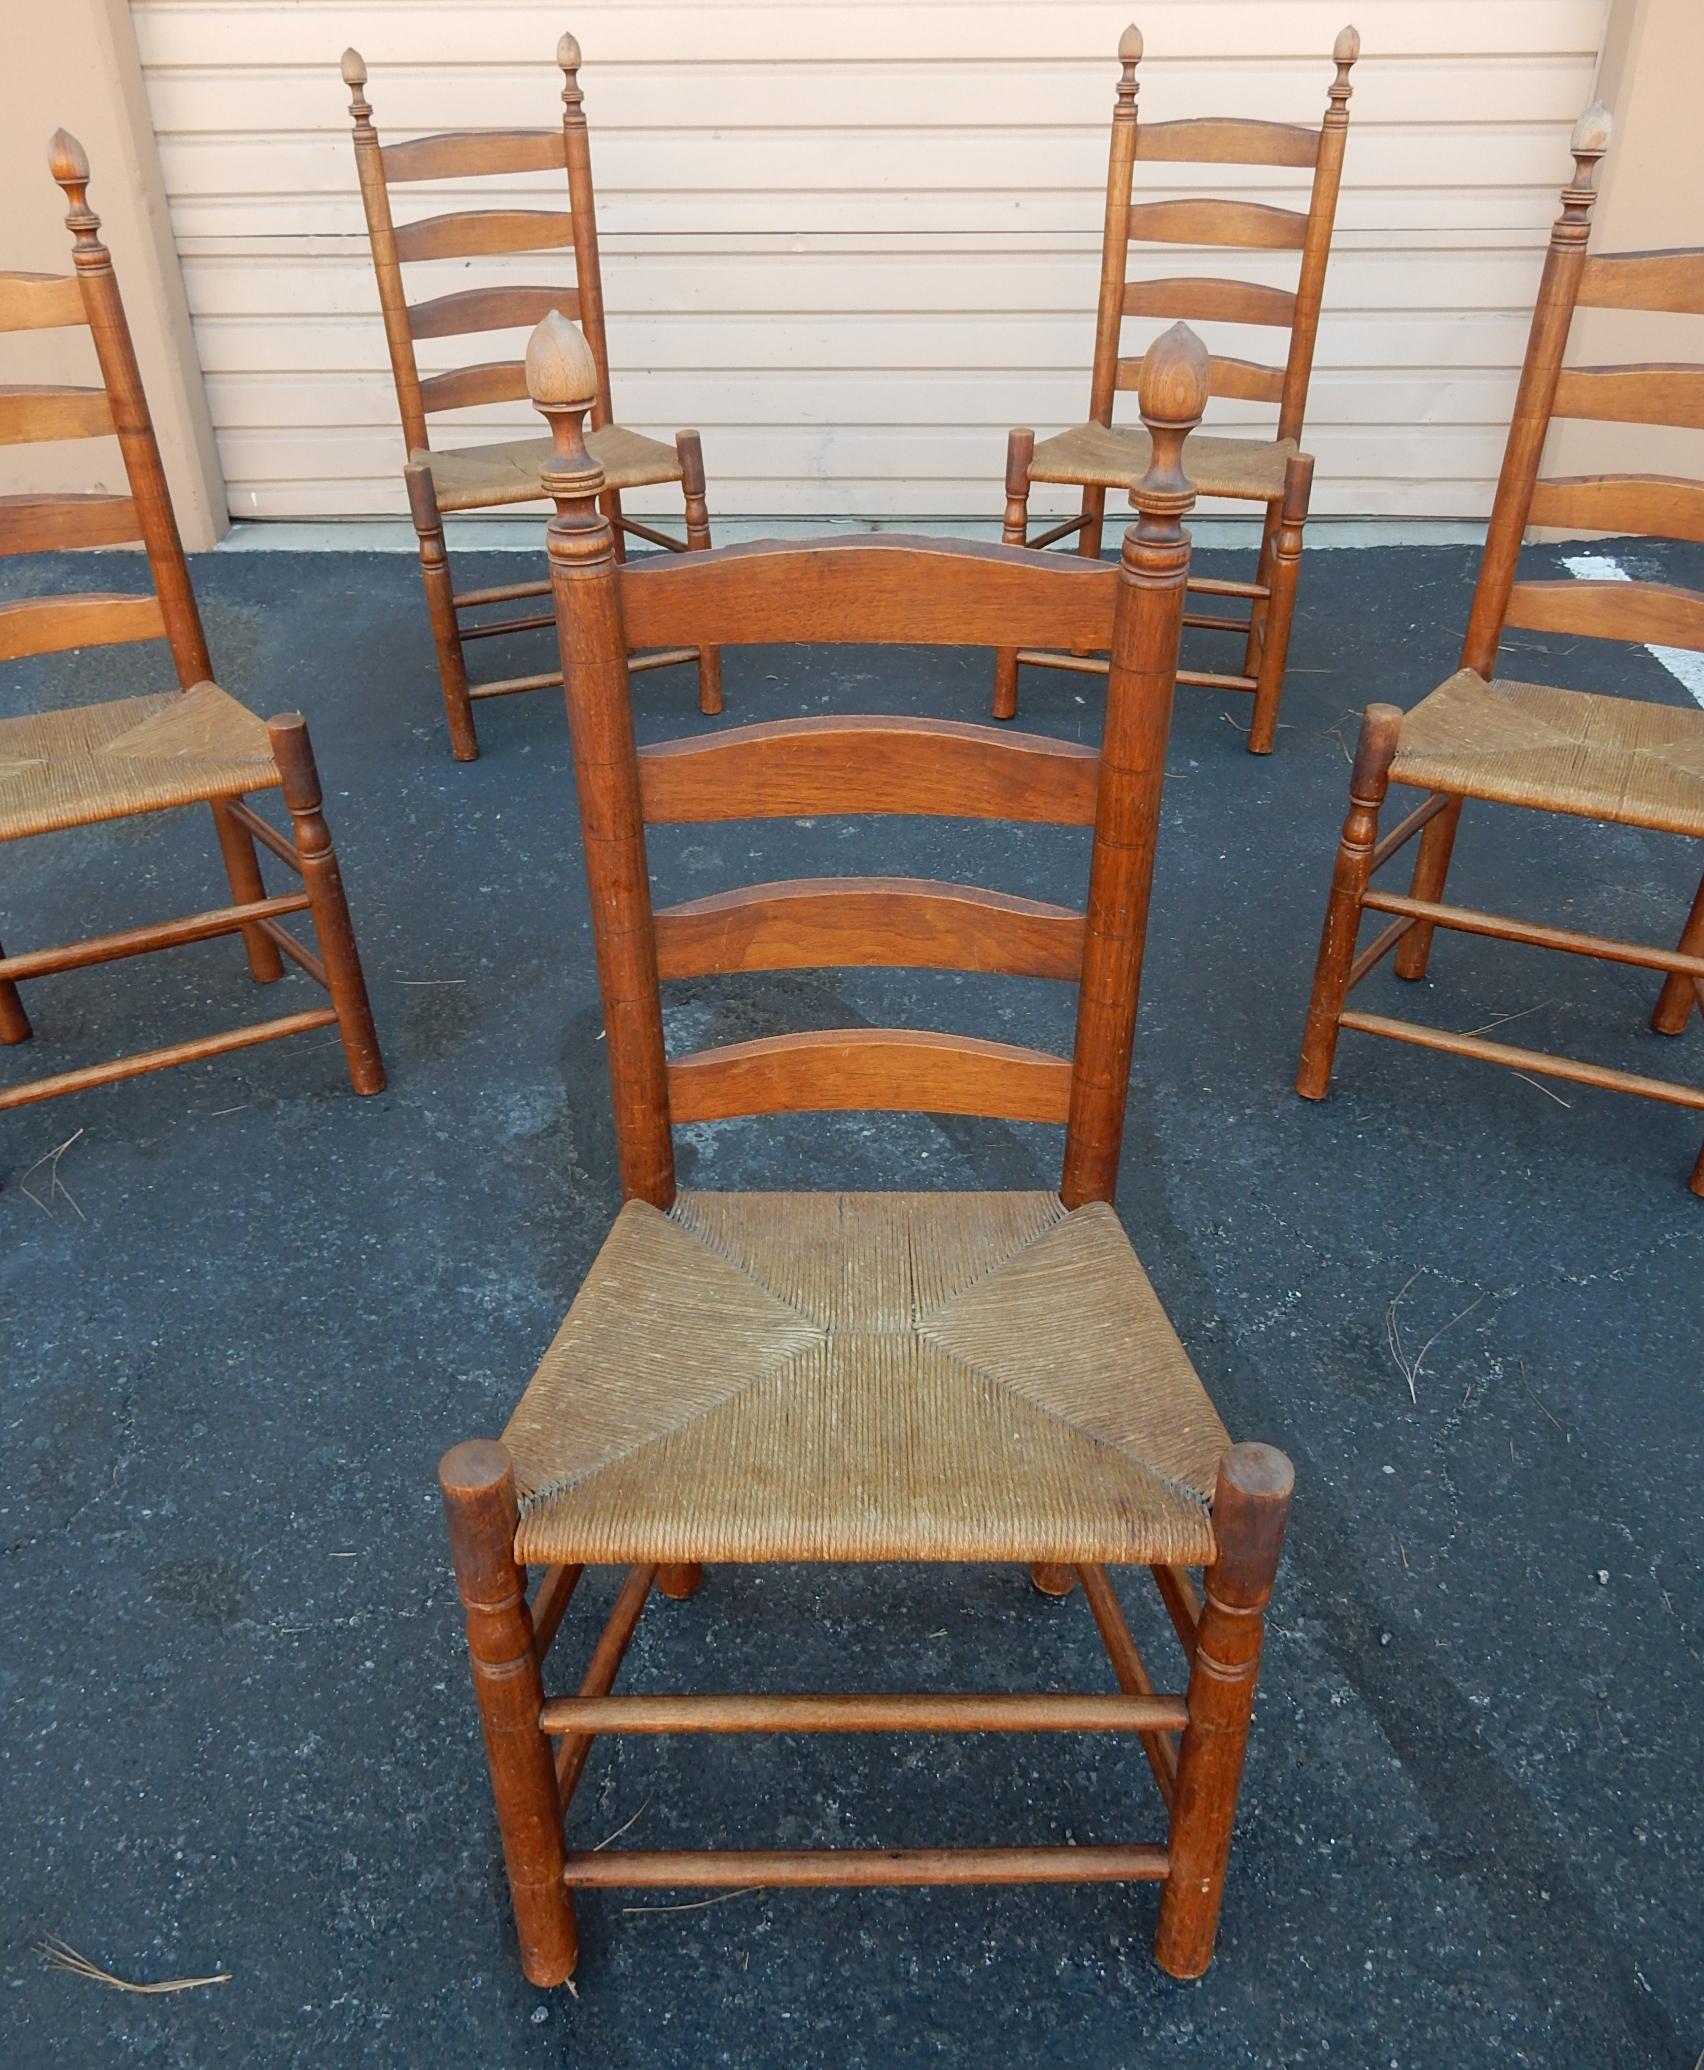 Finely crafted and aged set of 5 early 1900s
dining chairs with tall ladder backs and rush seating.
These are not restored and retain their original aged patina.
No repairs or issues.